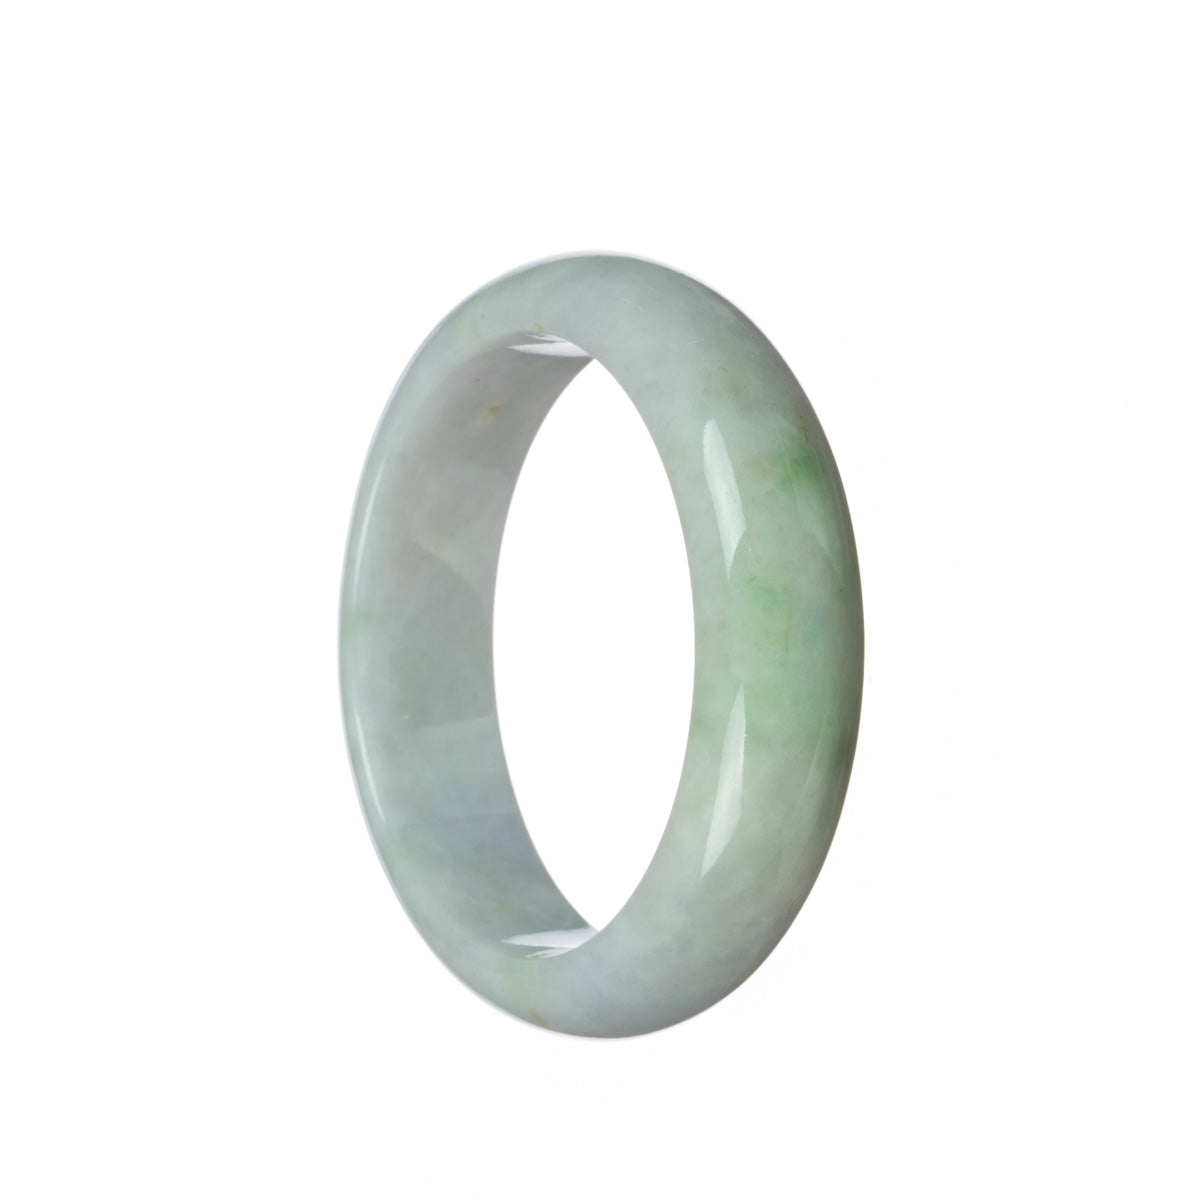 A delicate pale lavender and apple green Jadeite bracelet in a half moon shape.